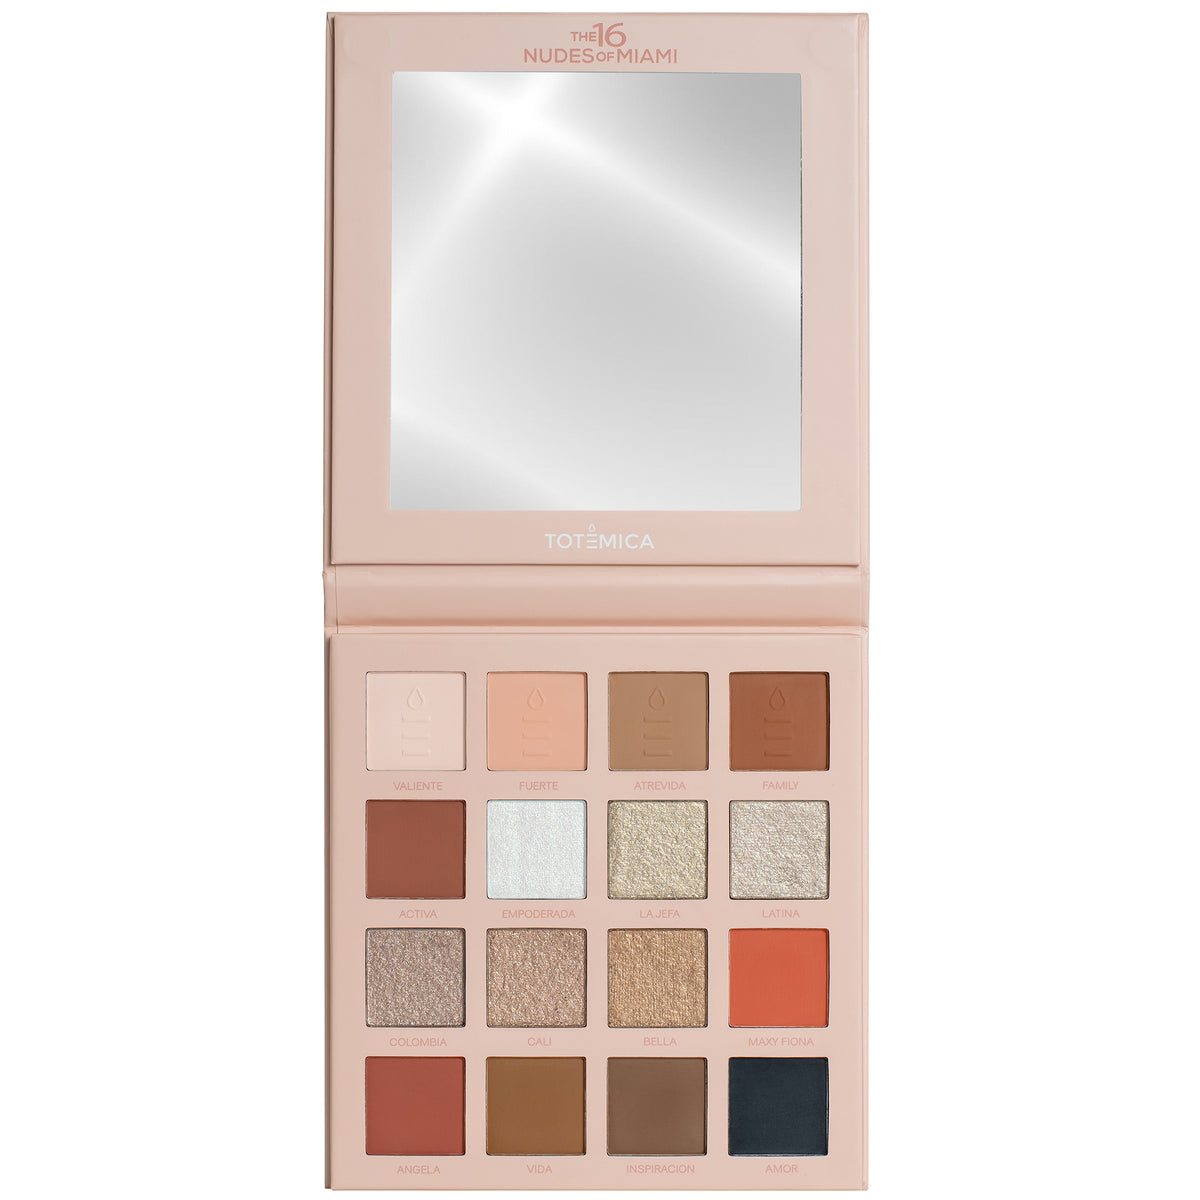 The 16 Nudes Of Palette Miami - | Wholesale Totemica Makeup